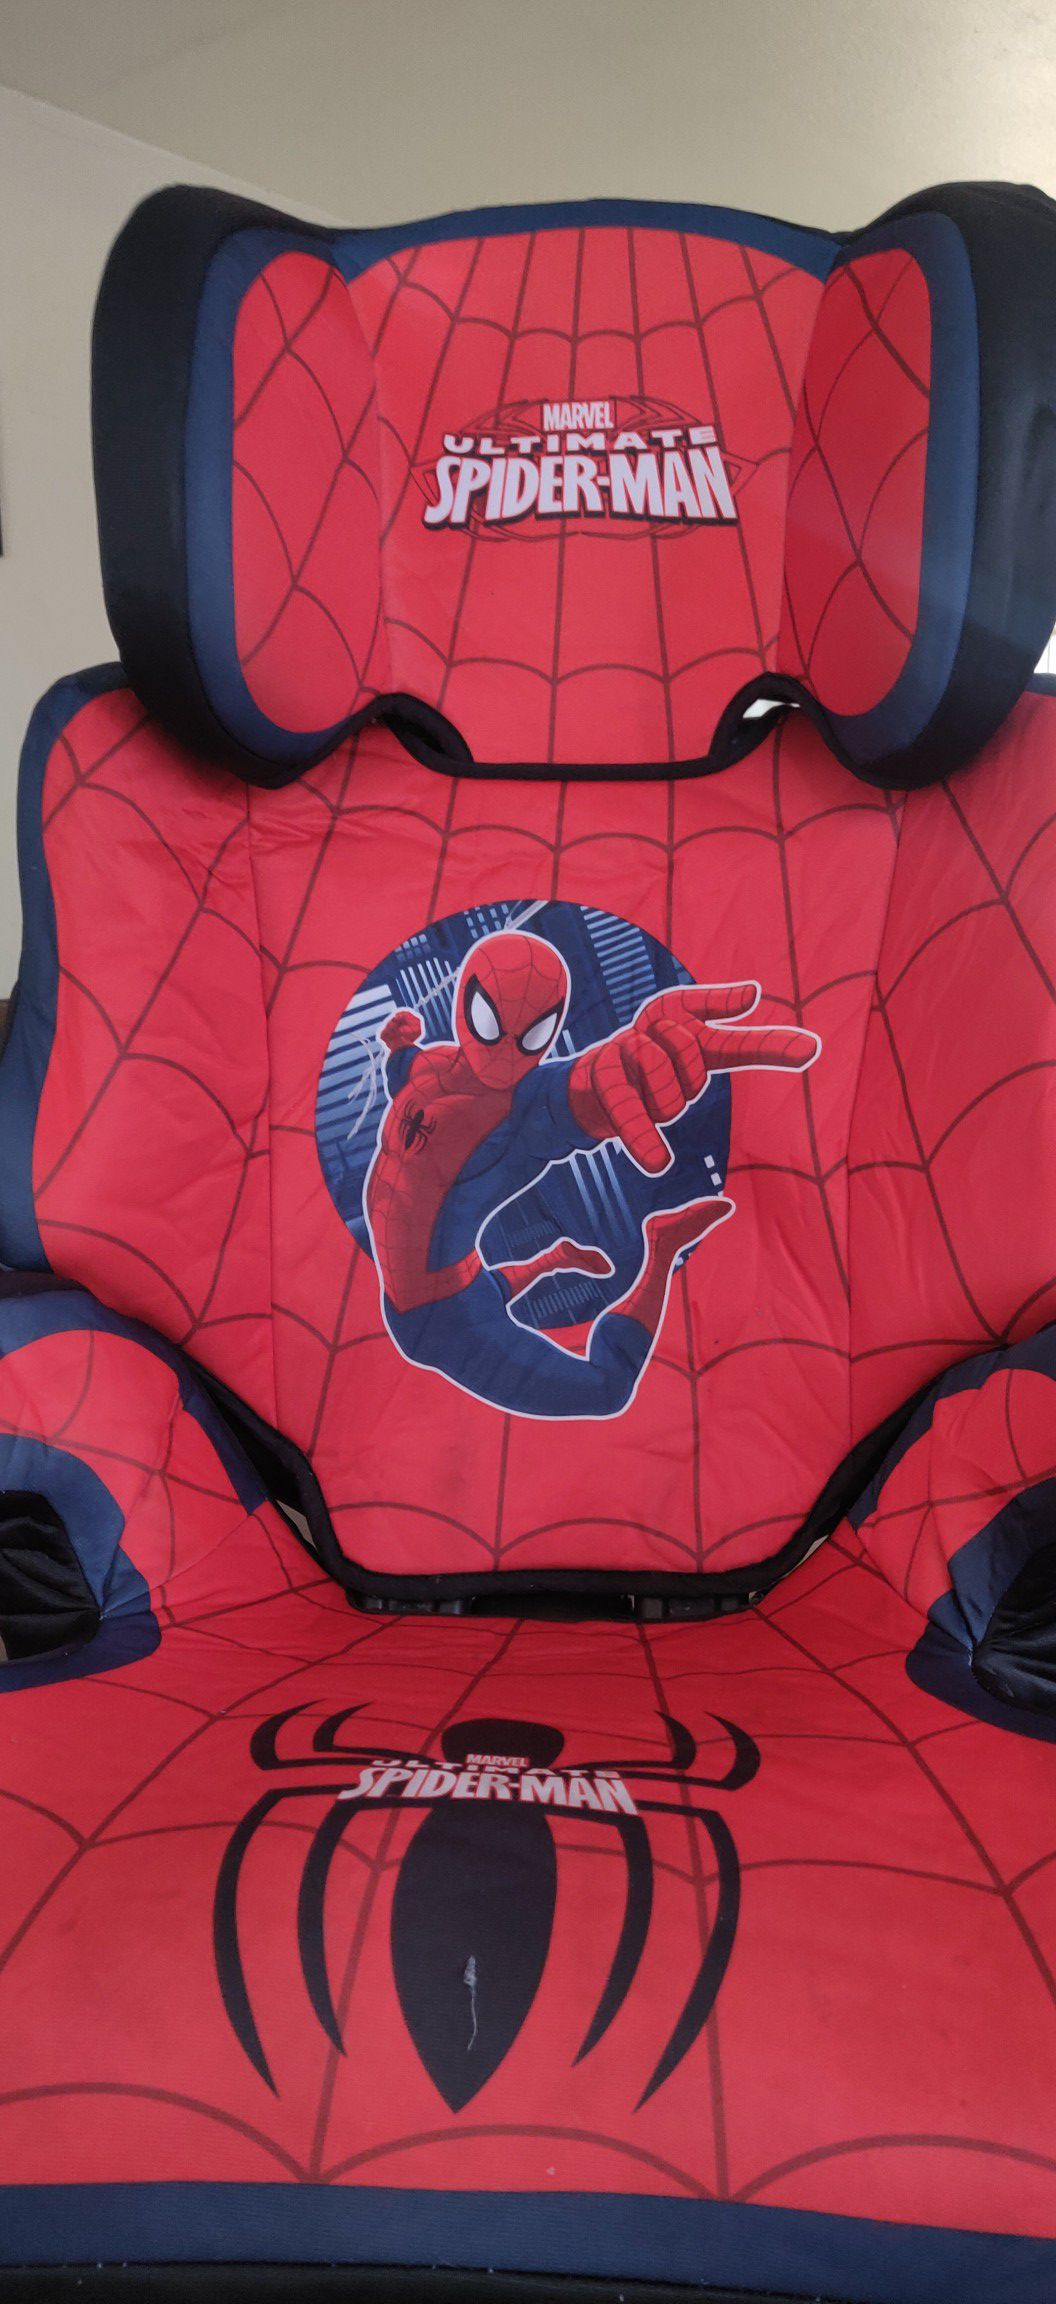 Spiderman booster seat